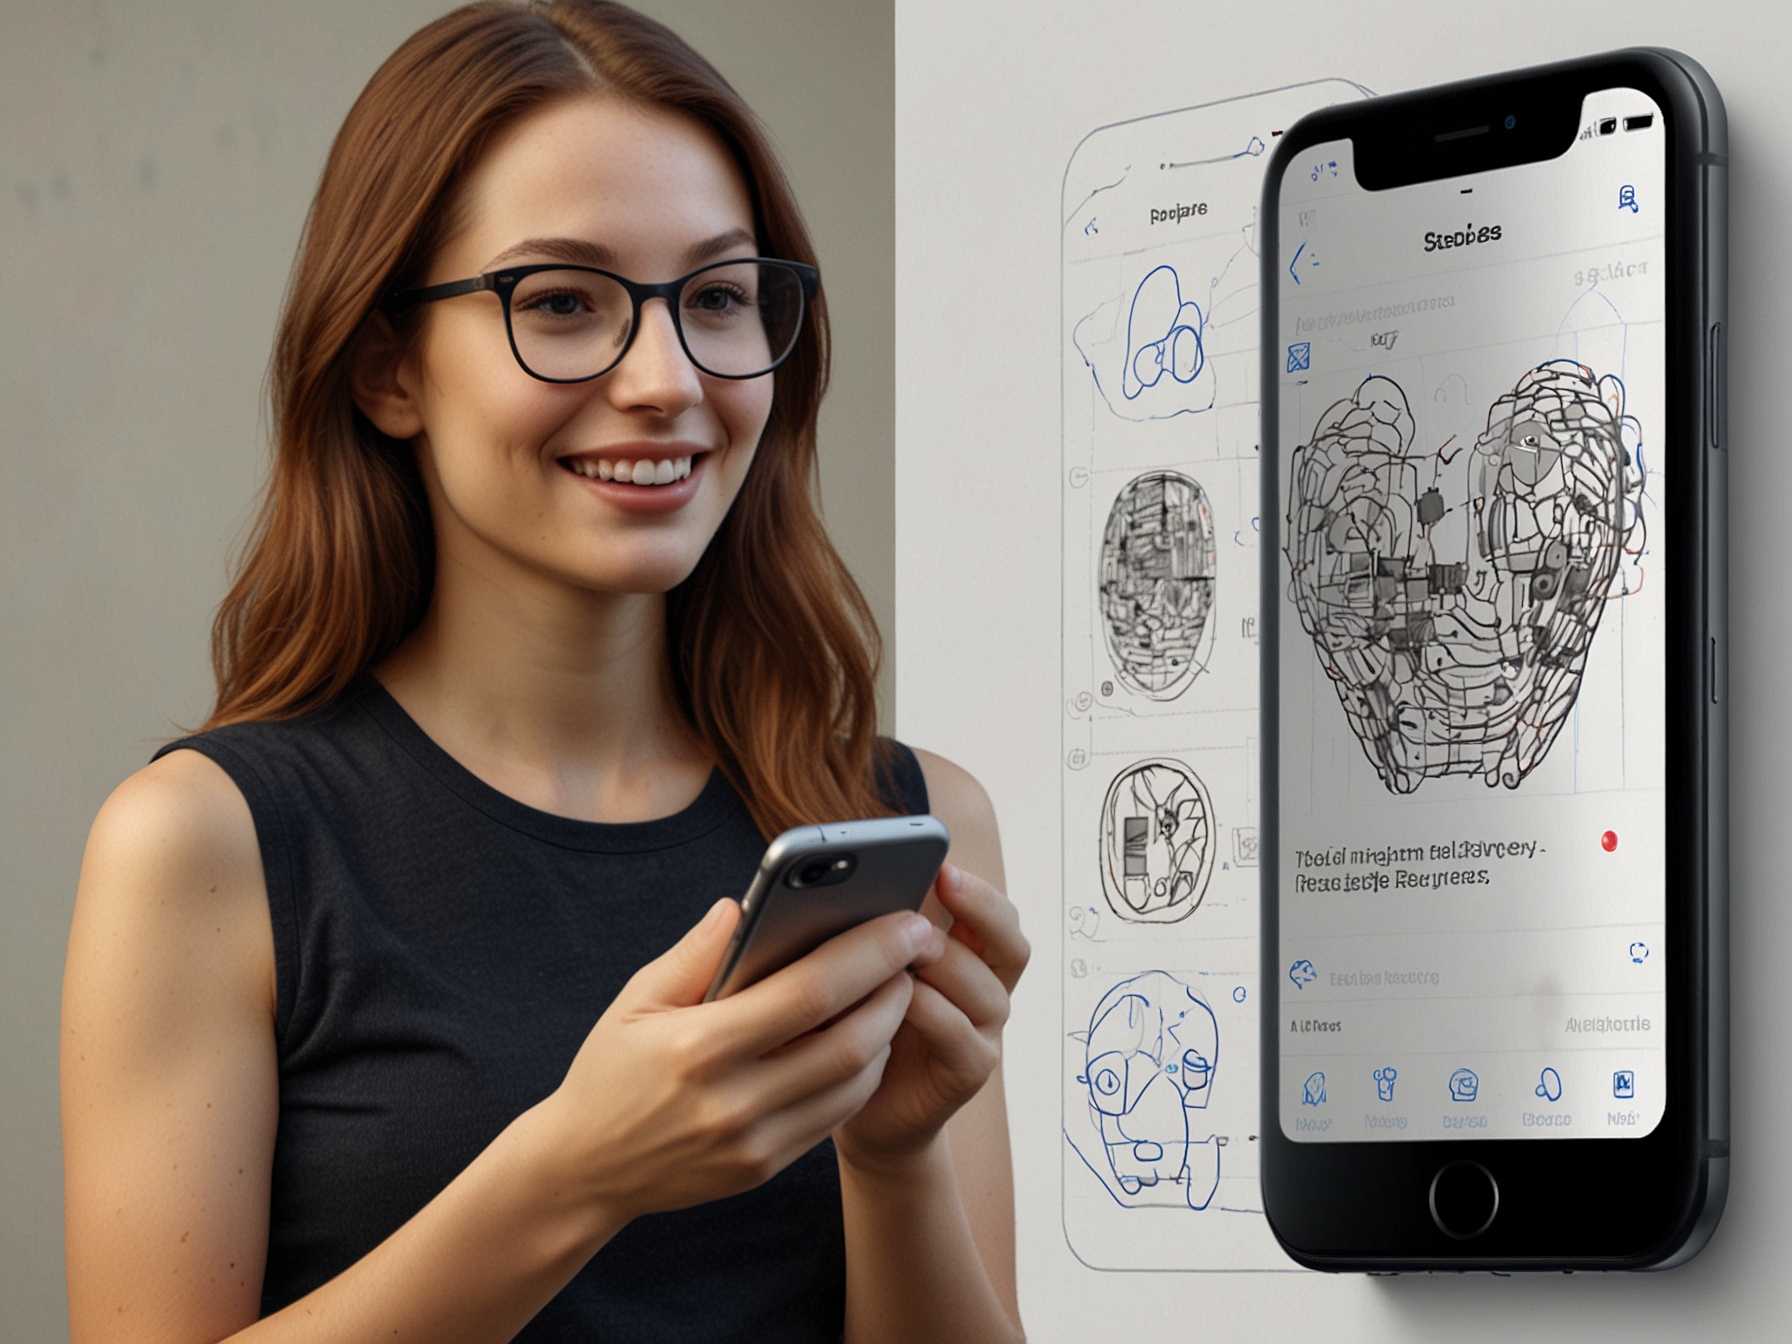 A user interacting with an iPhone 15 showcasing advanced Apple Intelligence features like image recognition and natural language processing, highlighting cutting-edge AI integration.